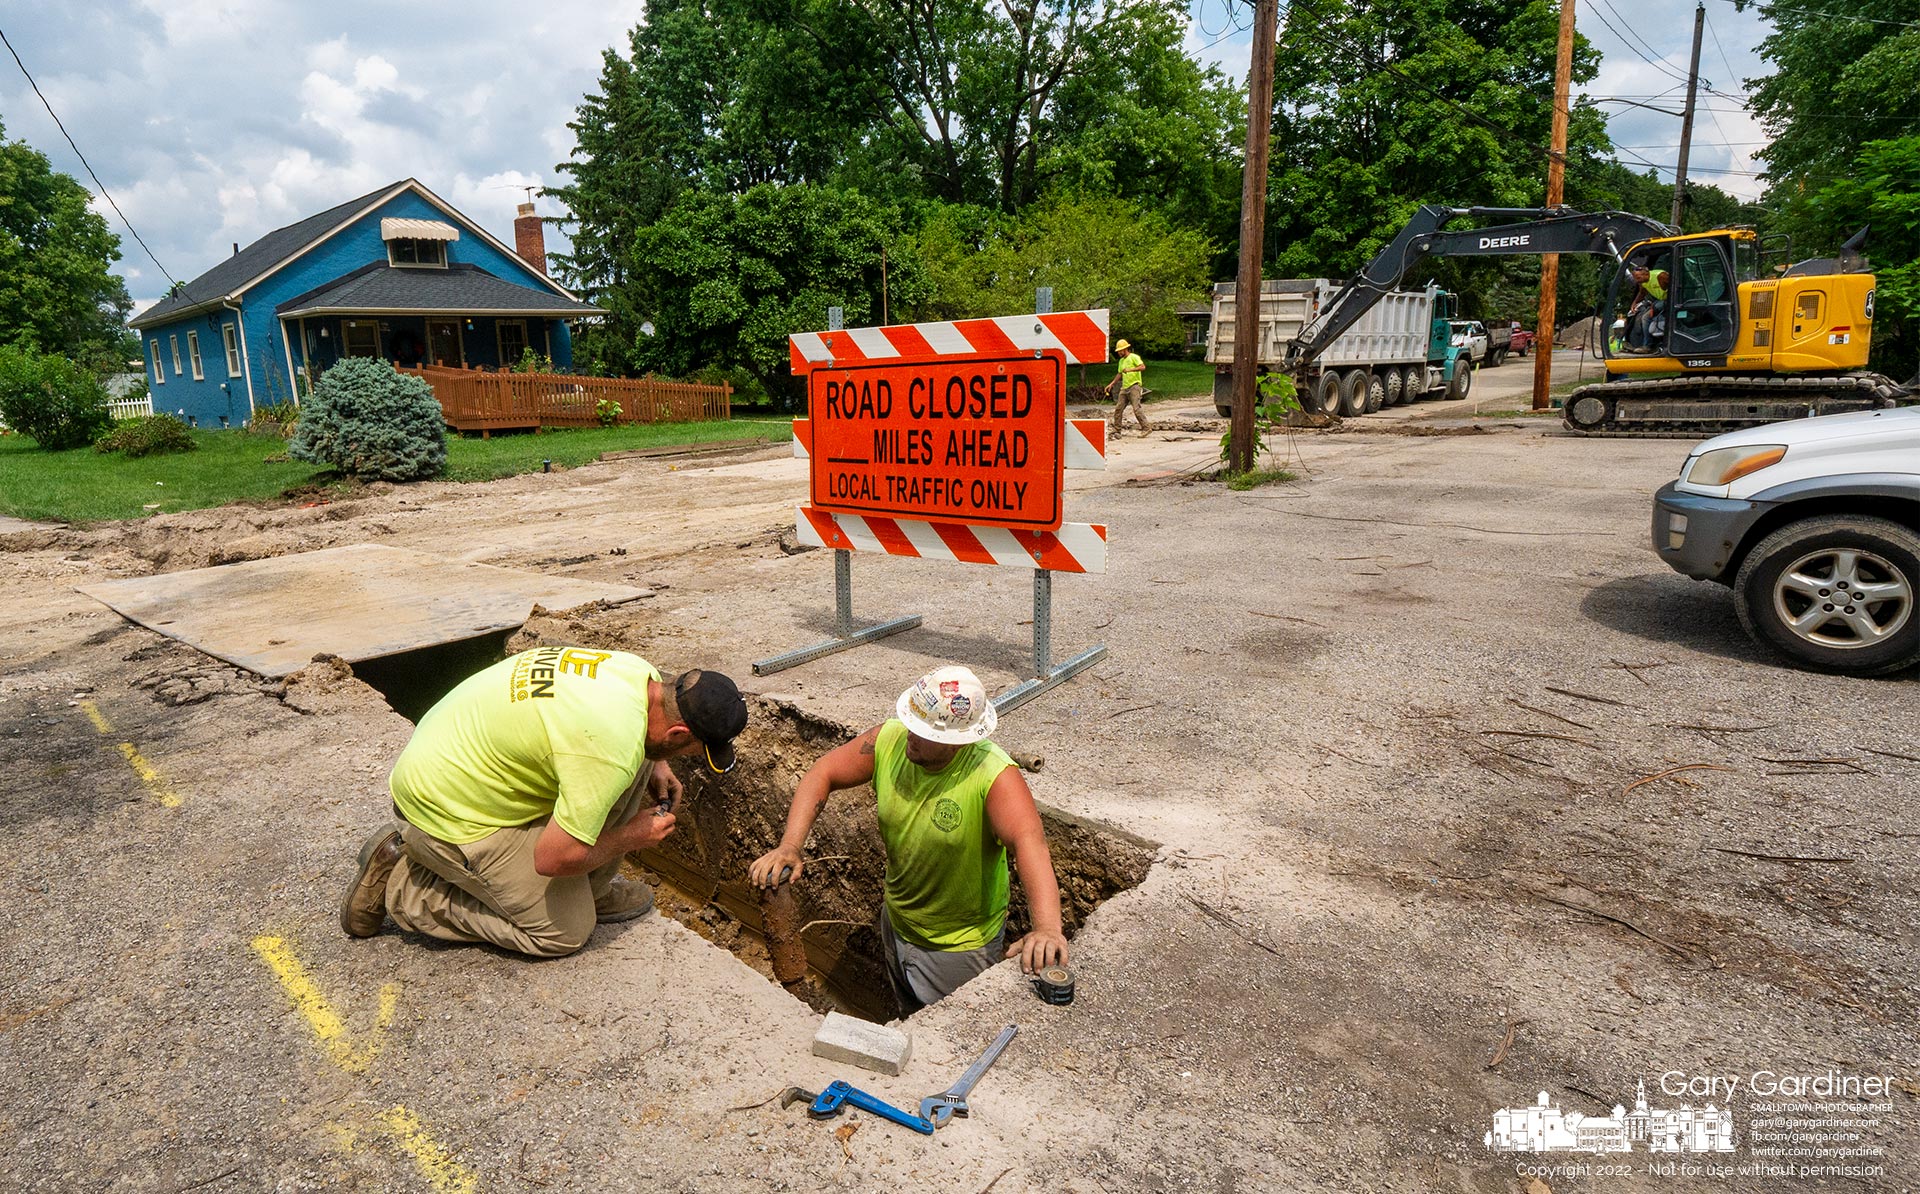 Two workmen attempt to repair a tubing cutter that failed while they were preparing to reconnect a house on East Home Street after laying a new water main before the roadway gets rebuilt. My Final Photo for August 11, 2022.